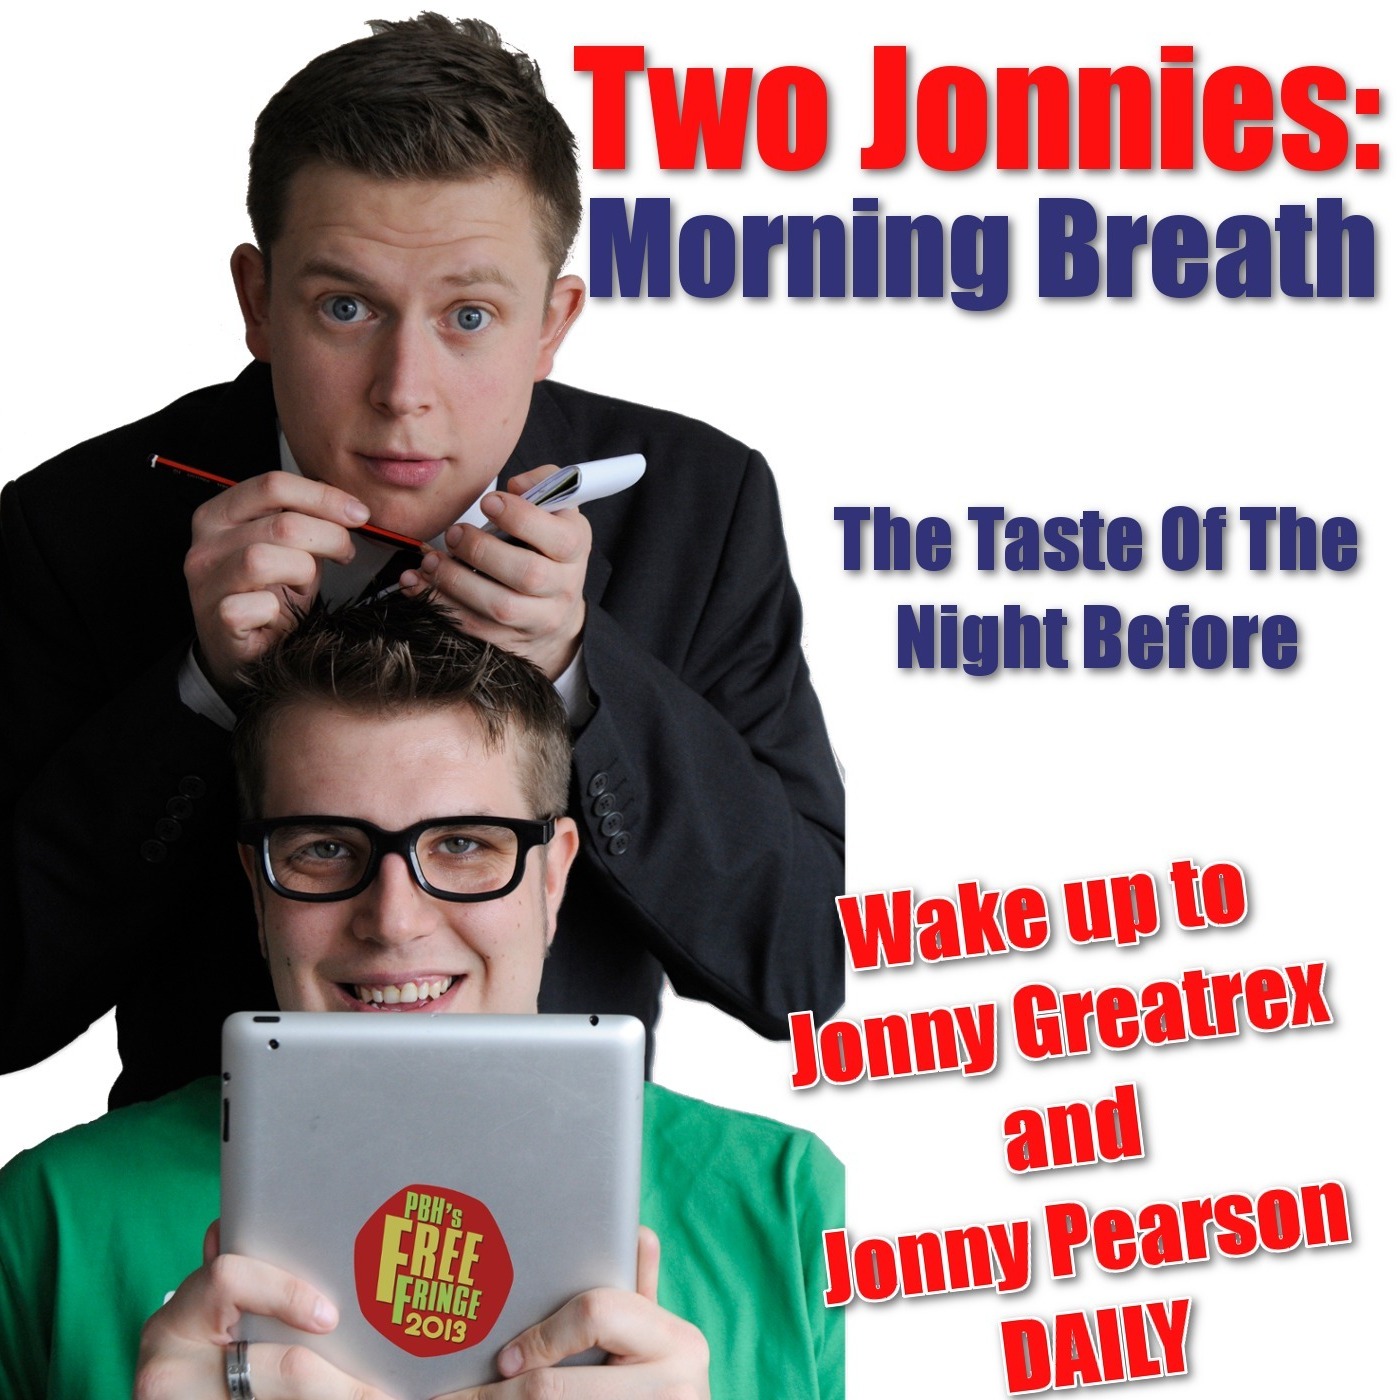 Two Jonnies: Morning Breath - Condiment Sandwich Debate with Chris Stokes